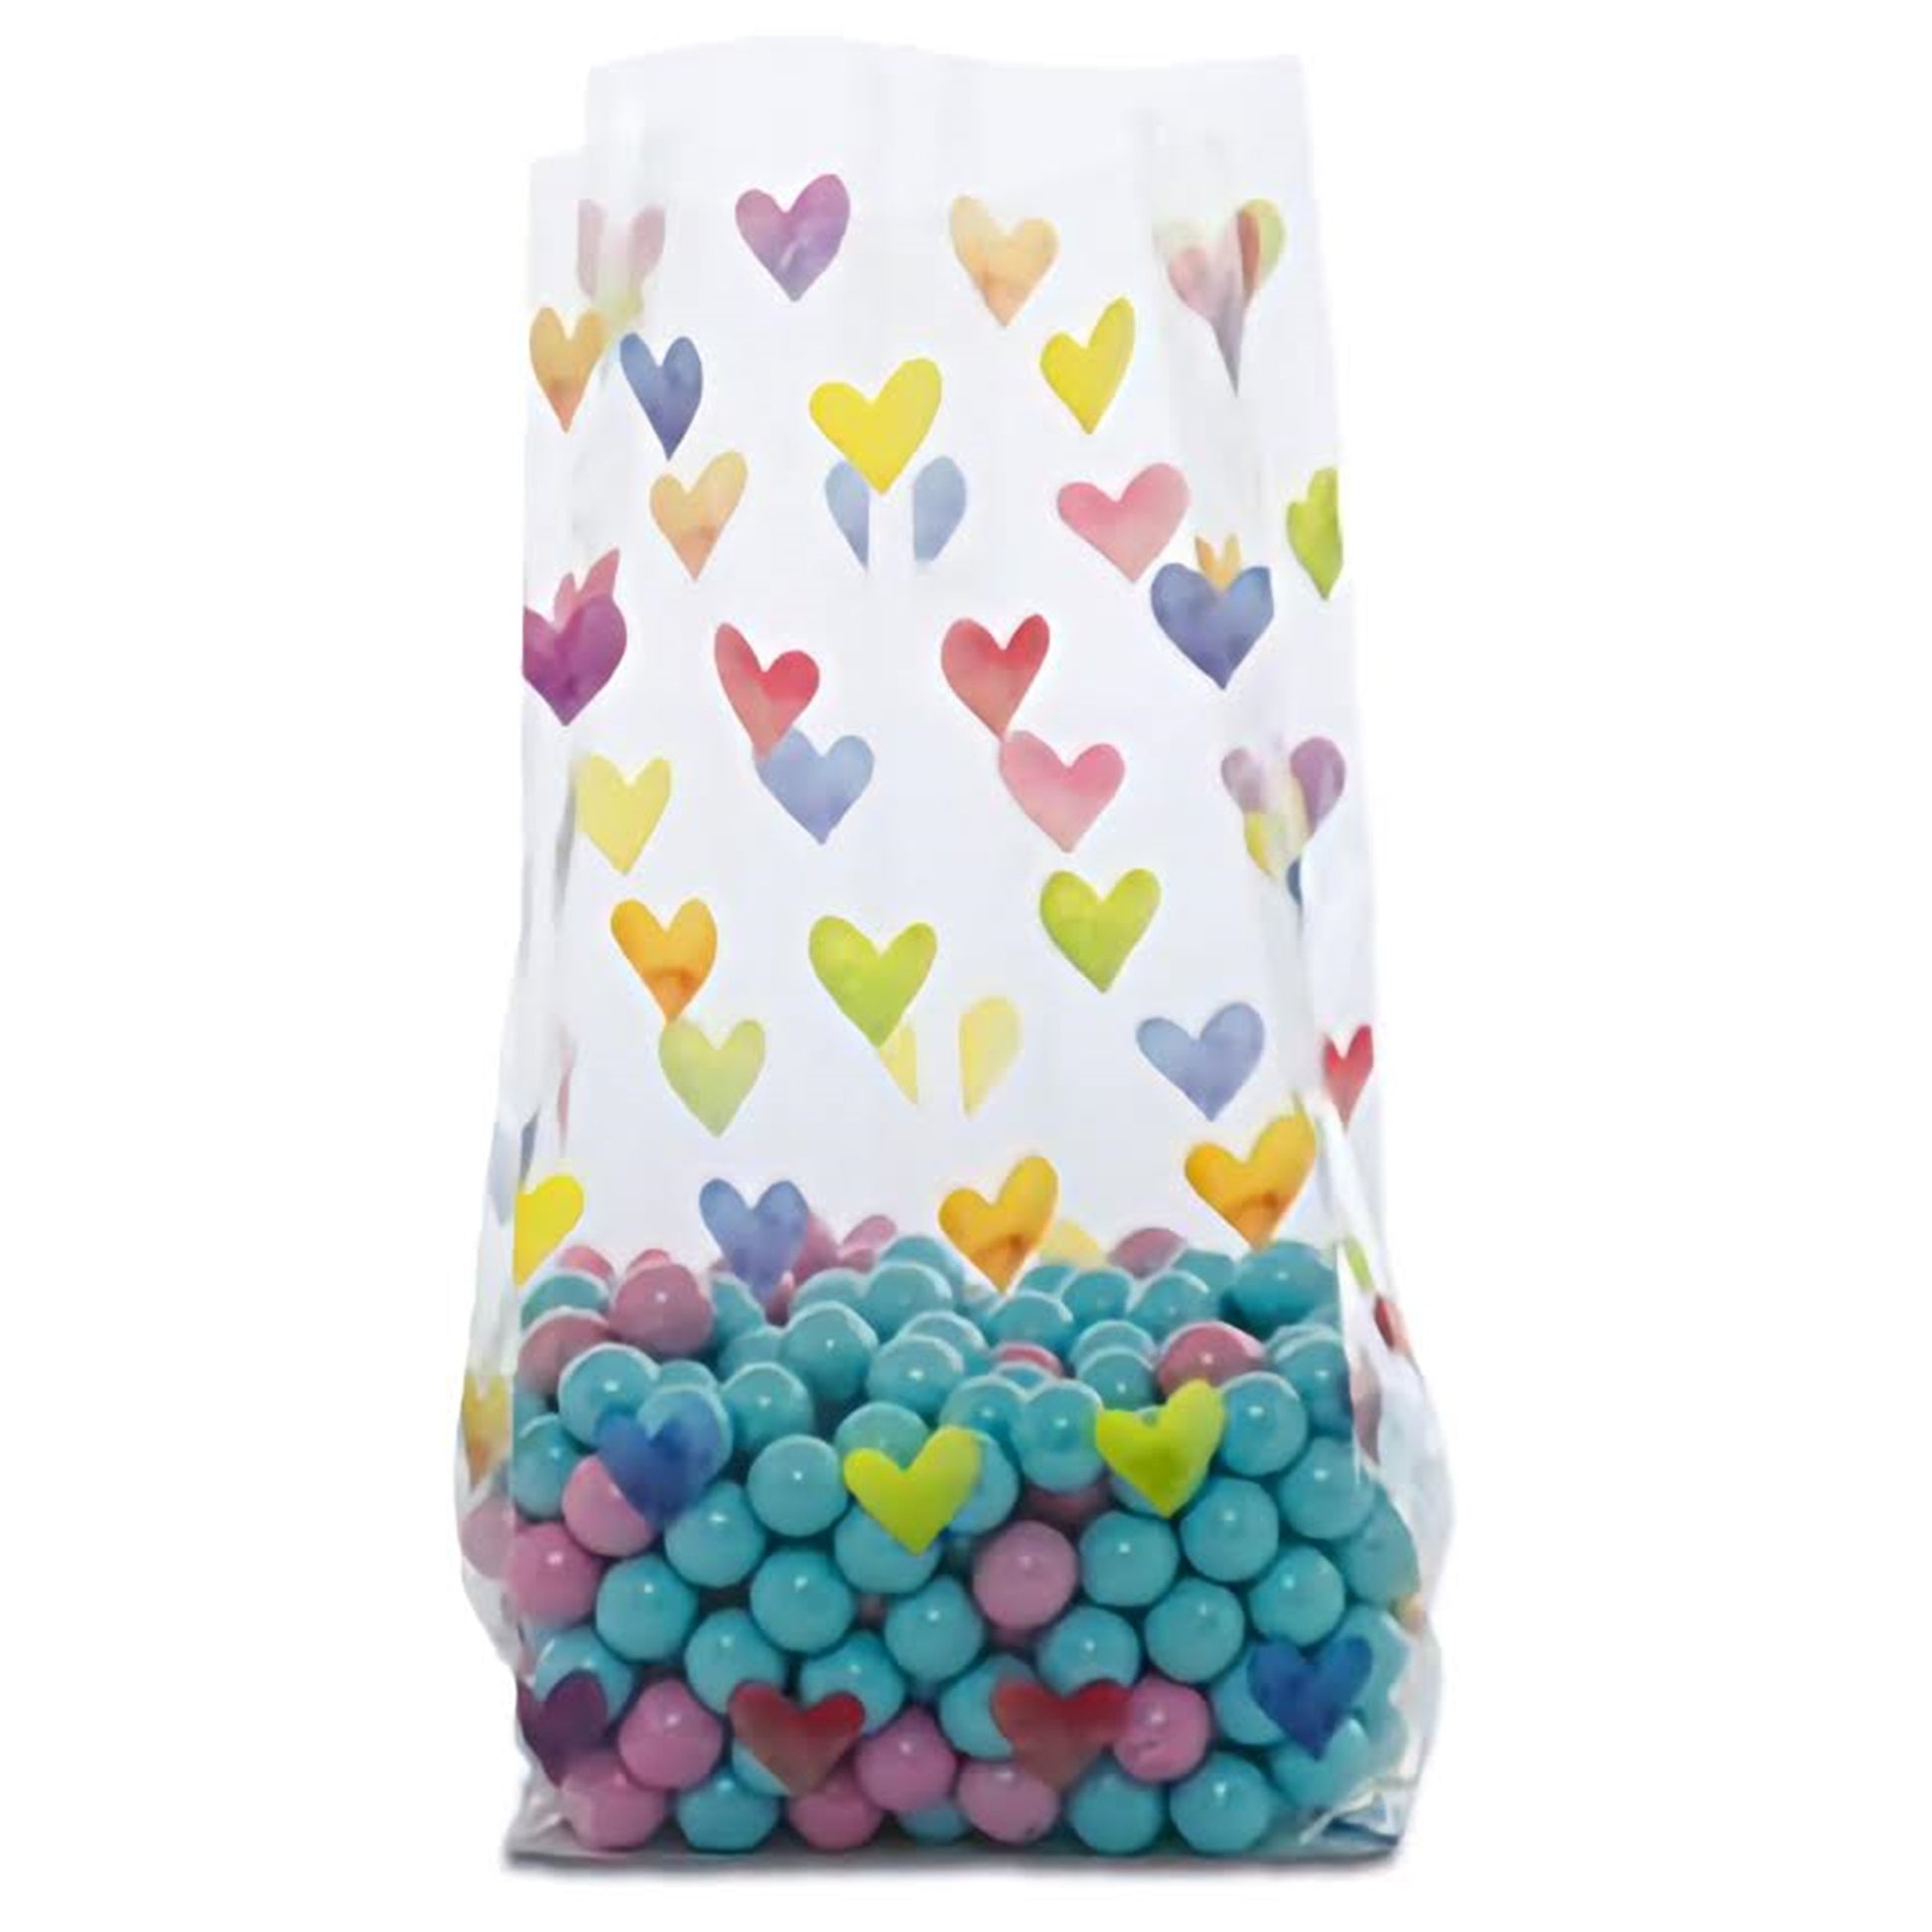 A cellophane treat bag adorned with a colorful array of watercolor-style hearts in shades of blue, yellow, pink, and purple, partially filled with candy to showcase the playful design.